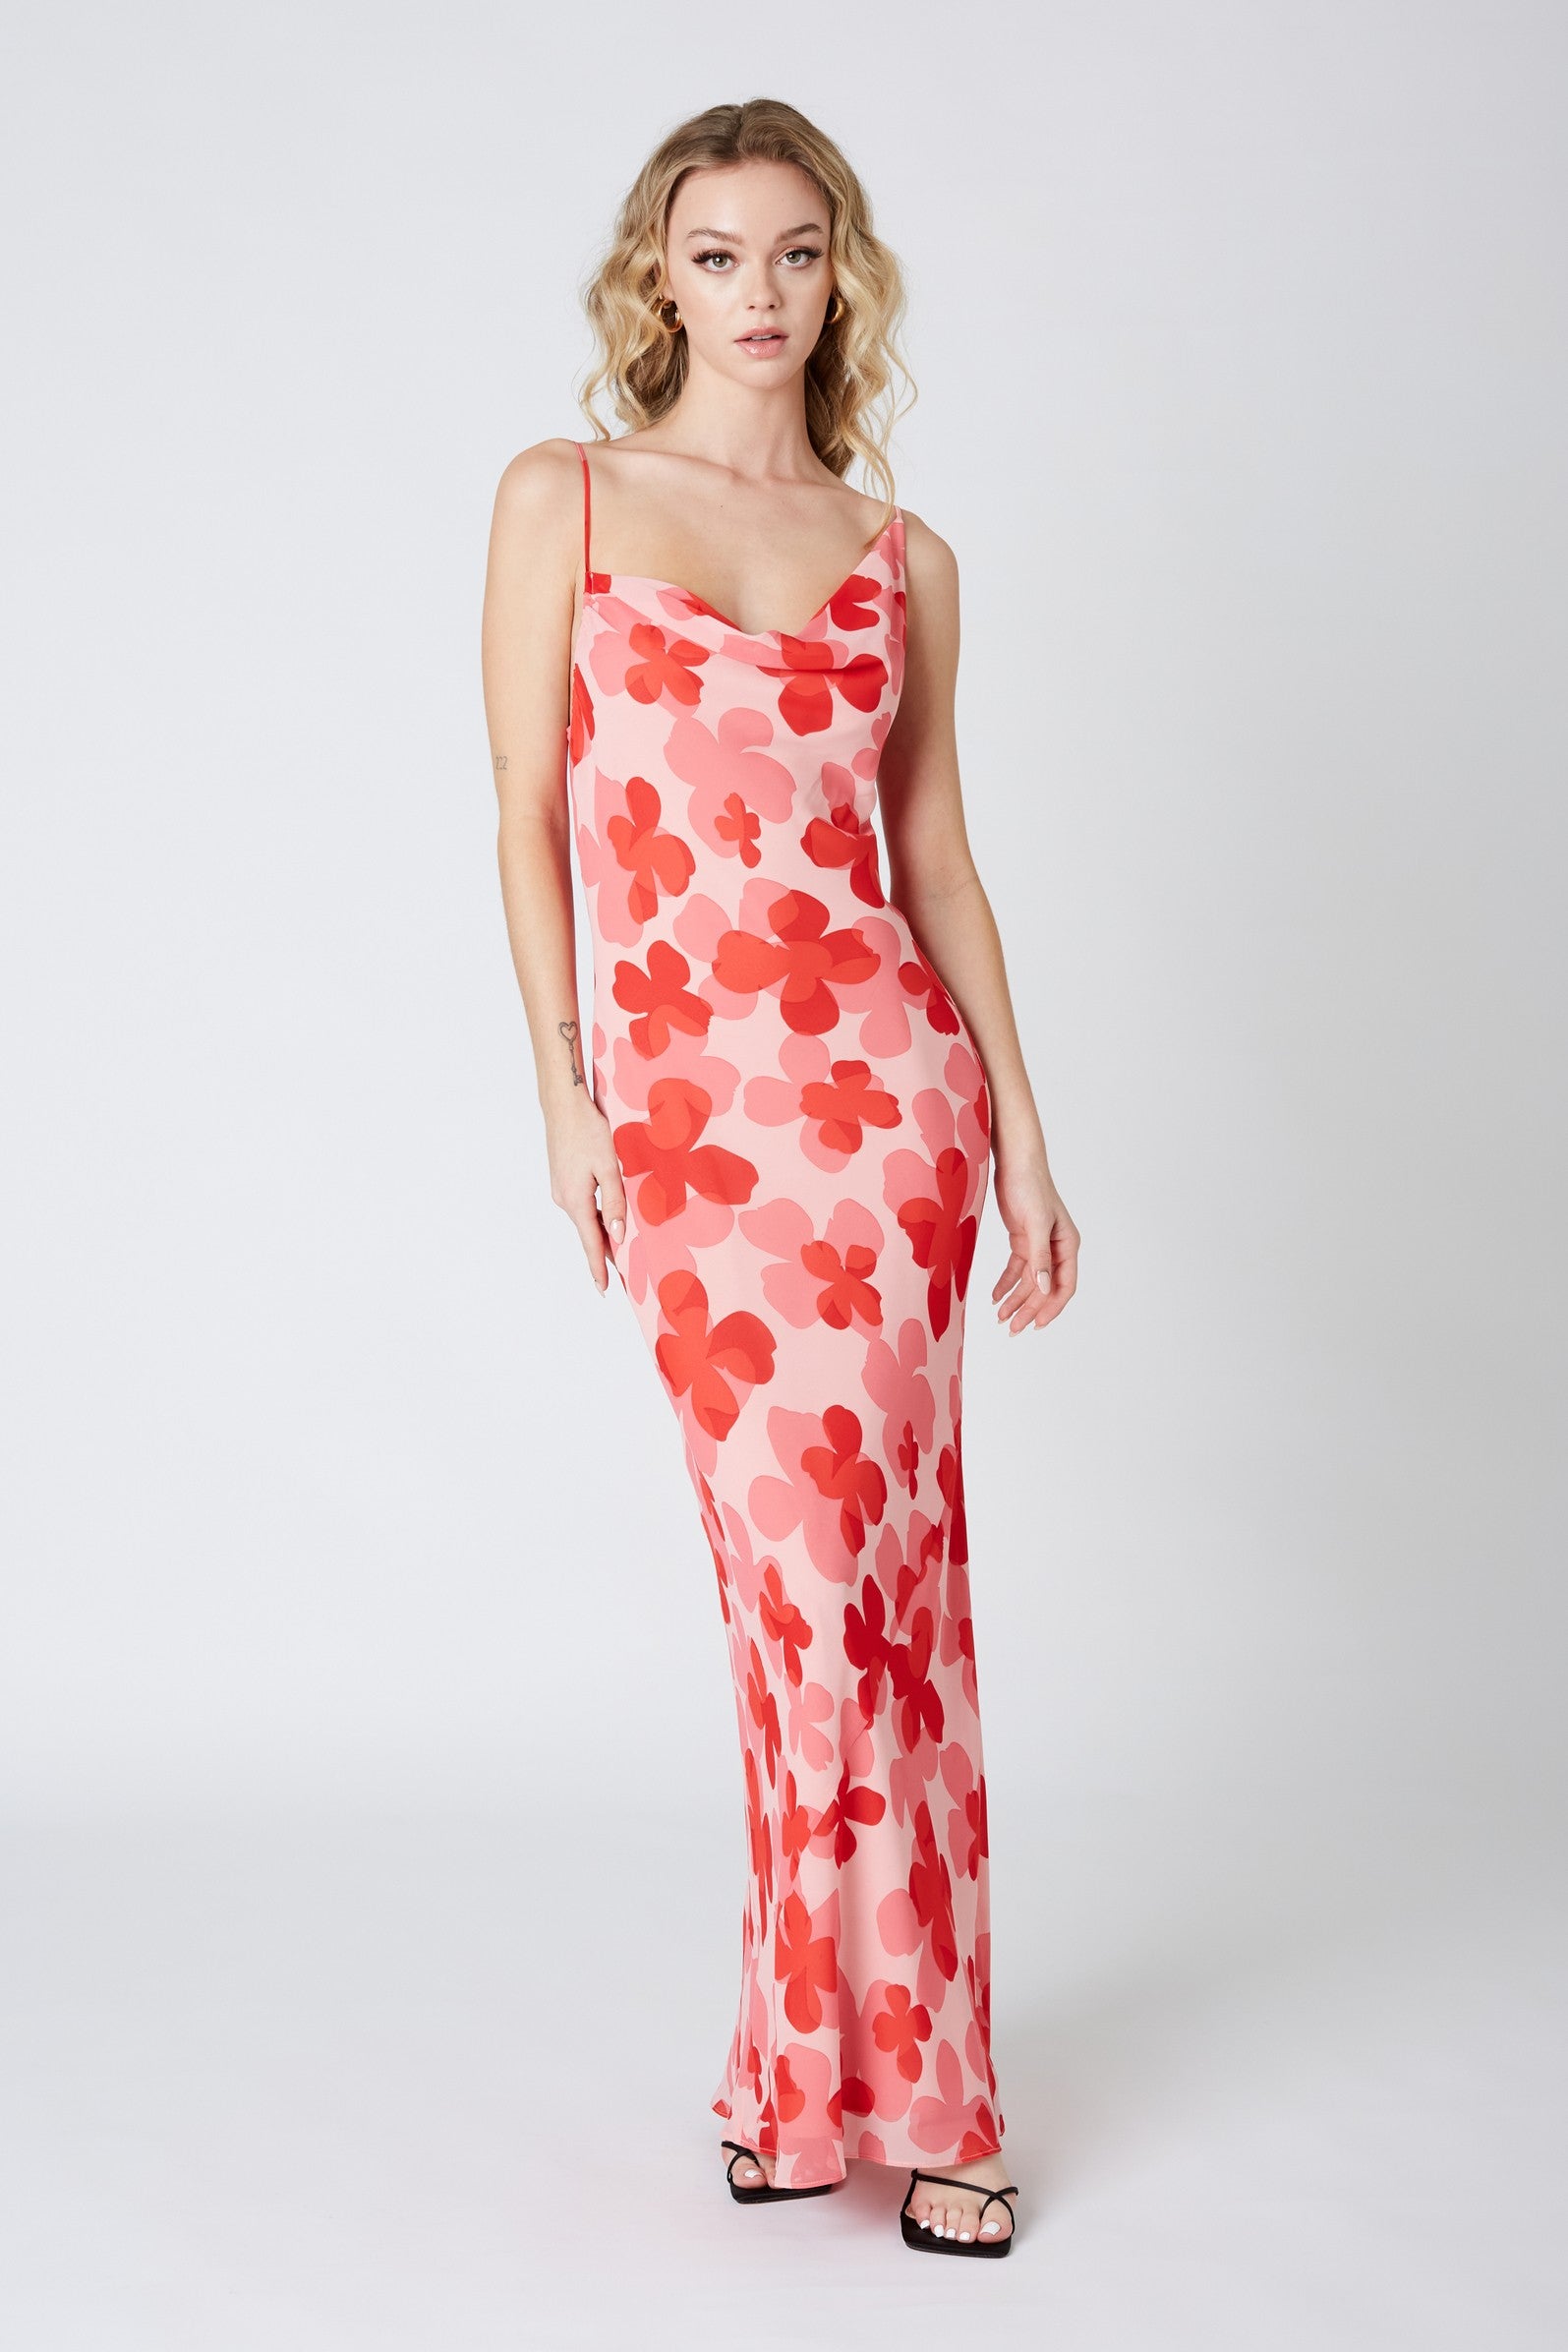 Cherry Floral Print Maxi Dress | Collective Request 